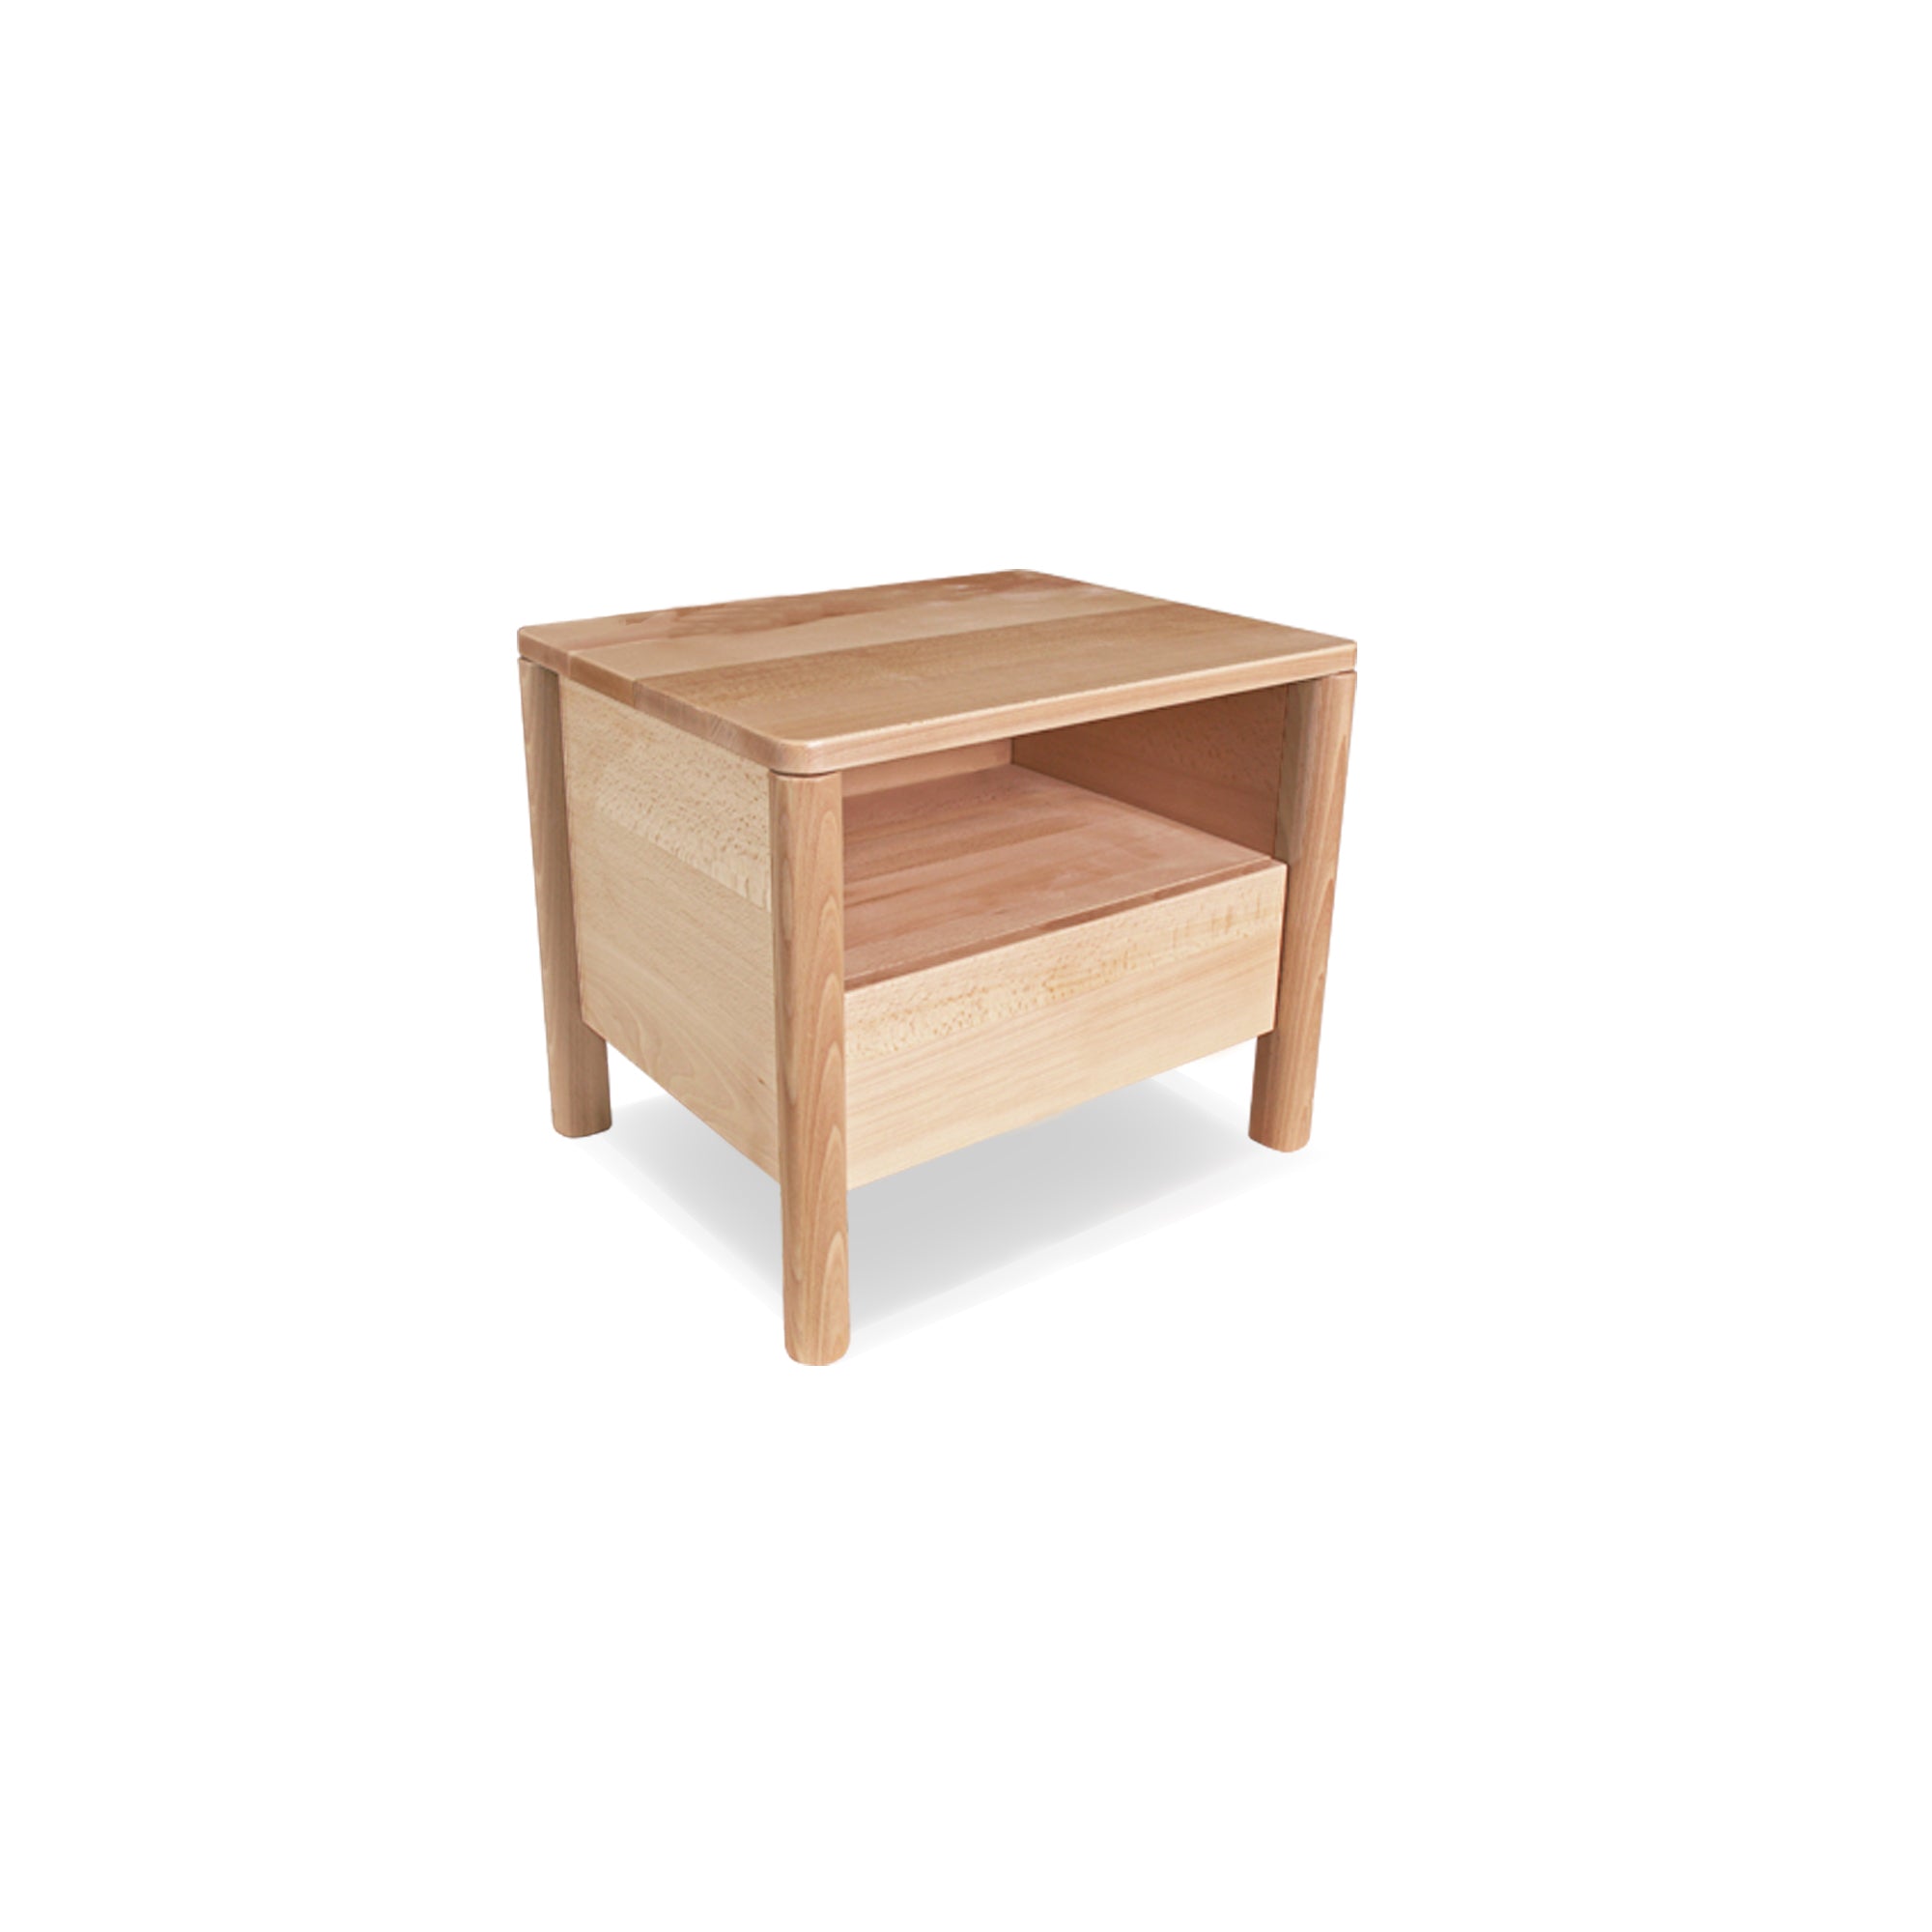 DROP Bedside Table, Beech Wood without doors natural colour